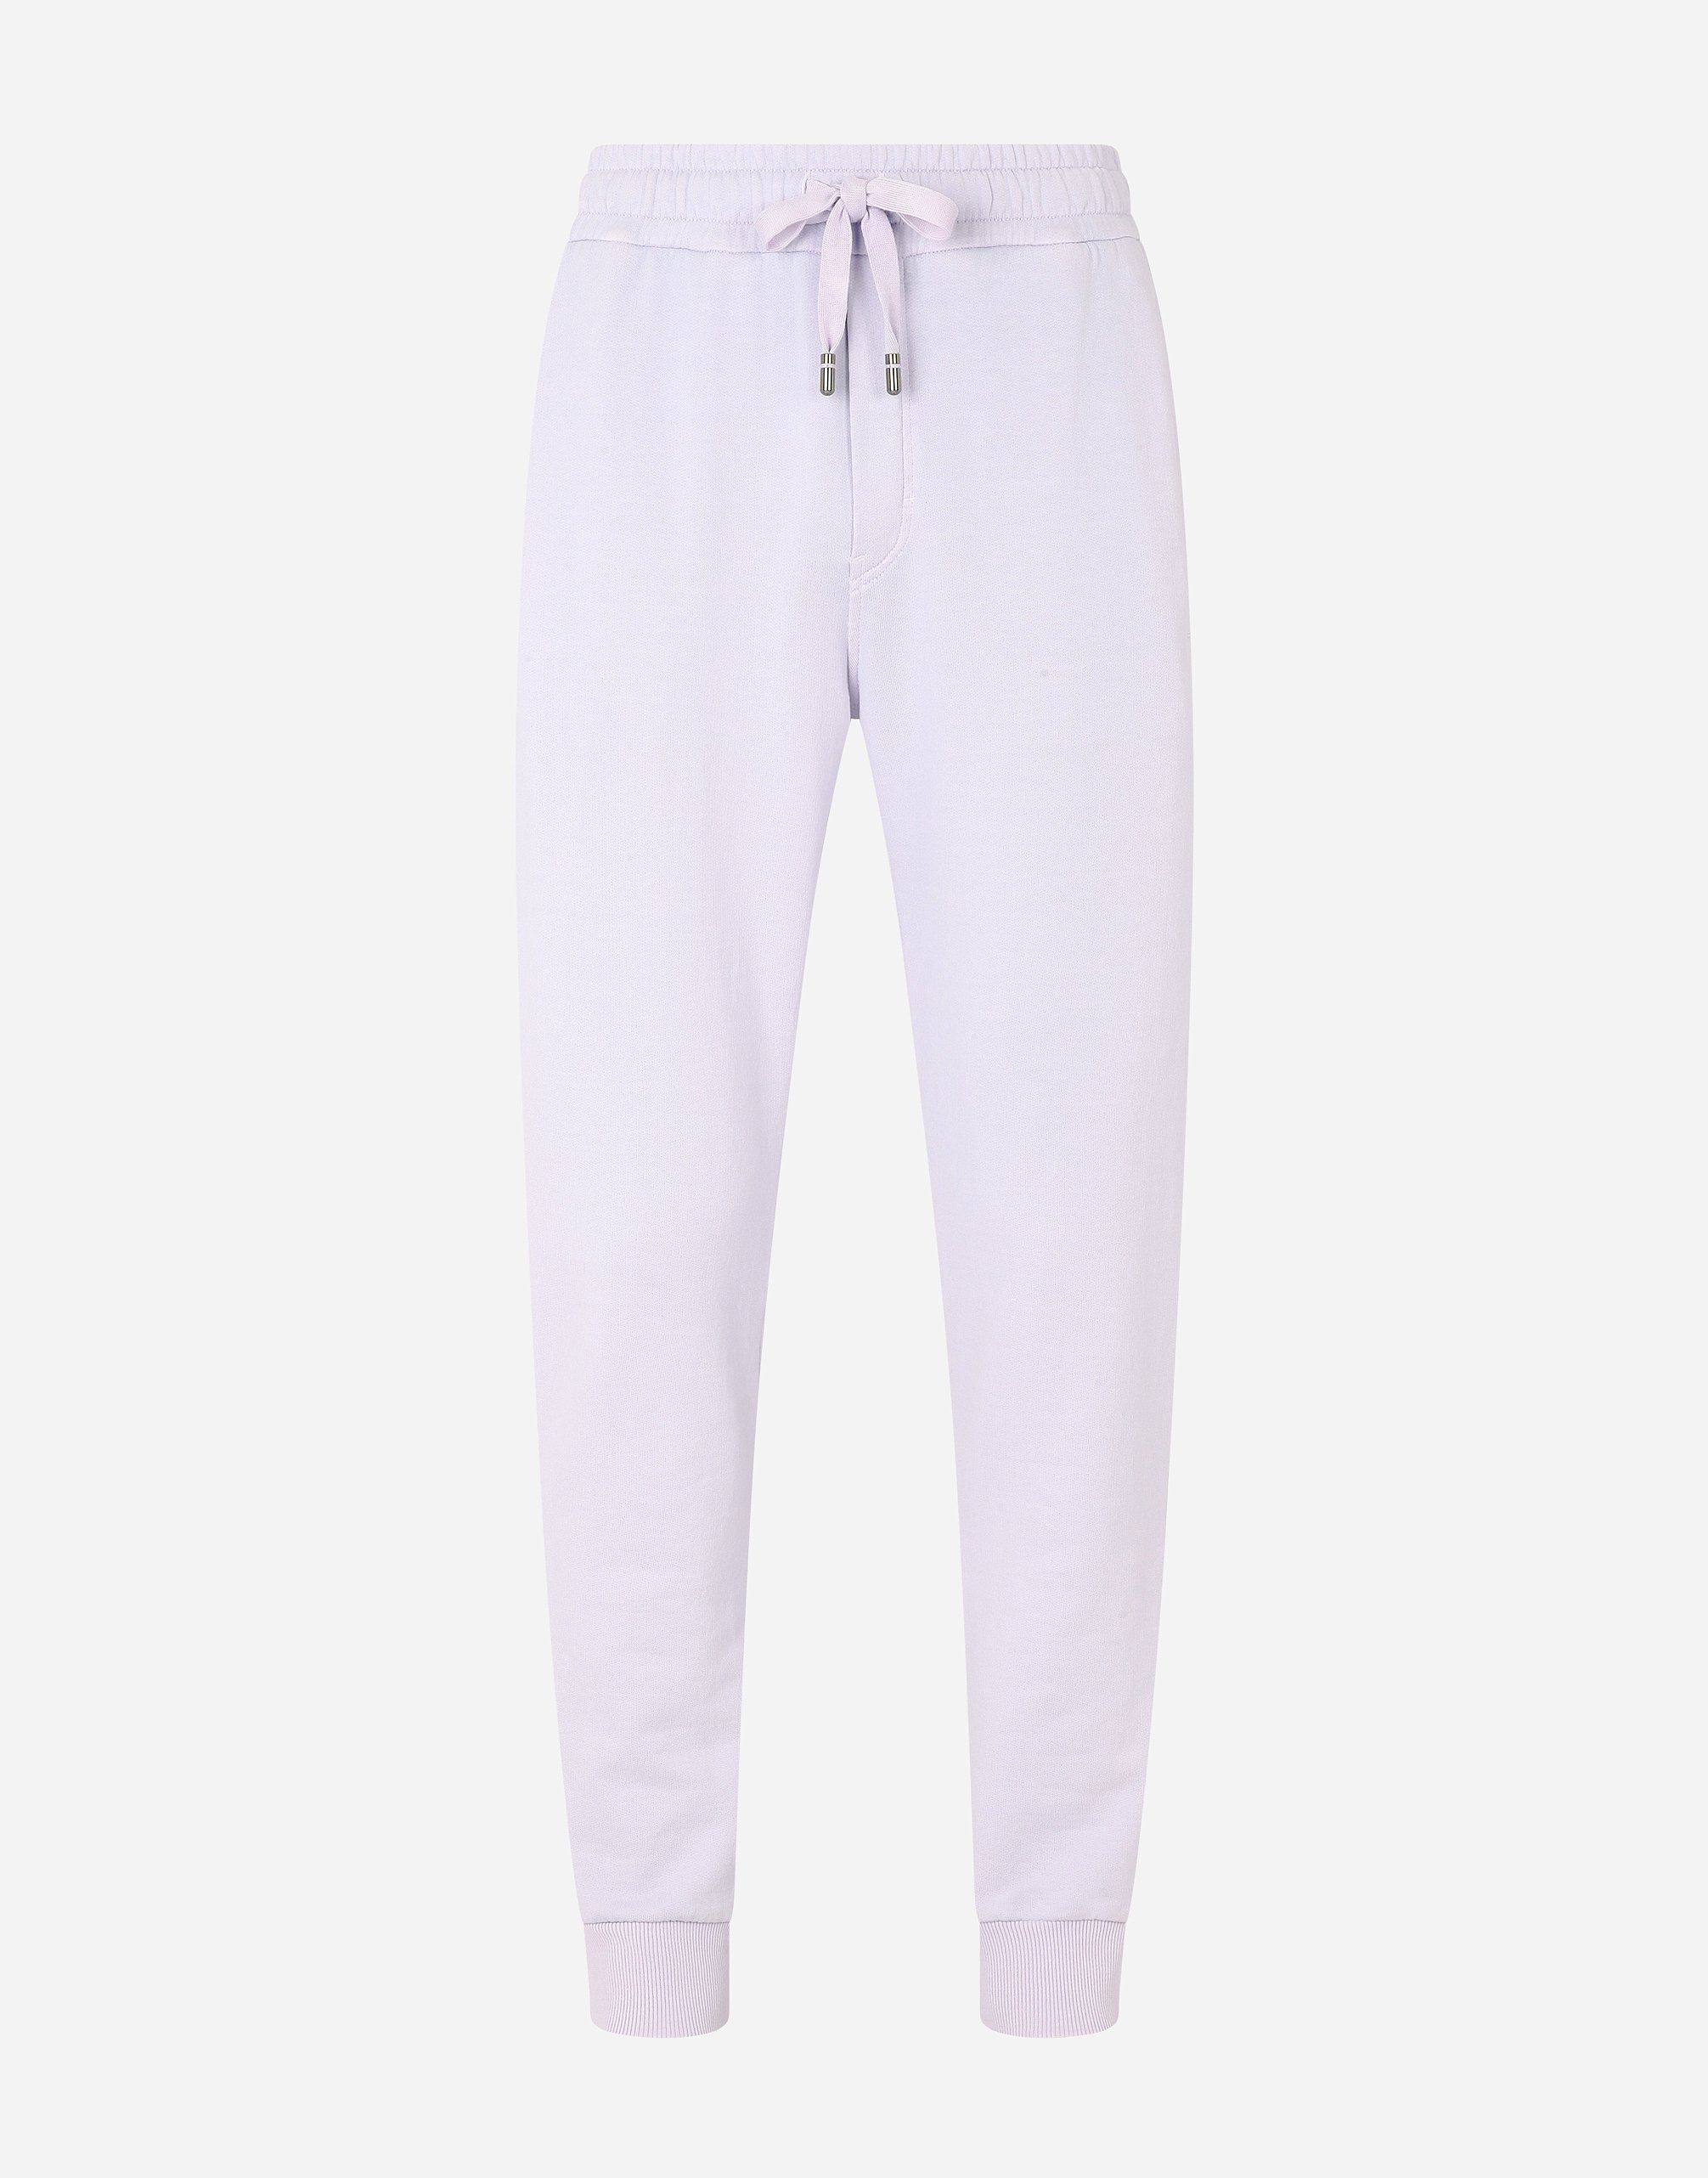 Jersey jogging pants with branded tag in Wisteria